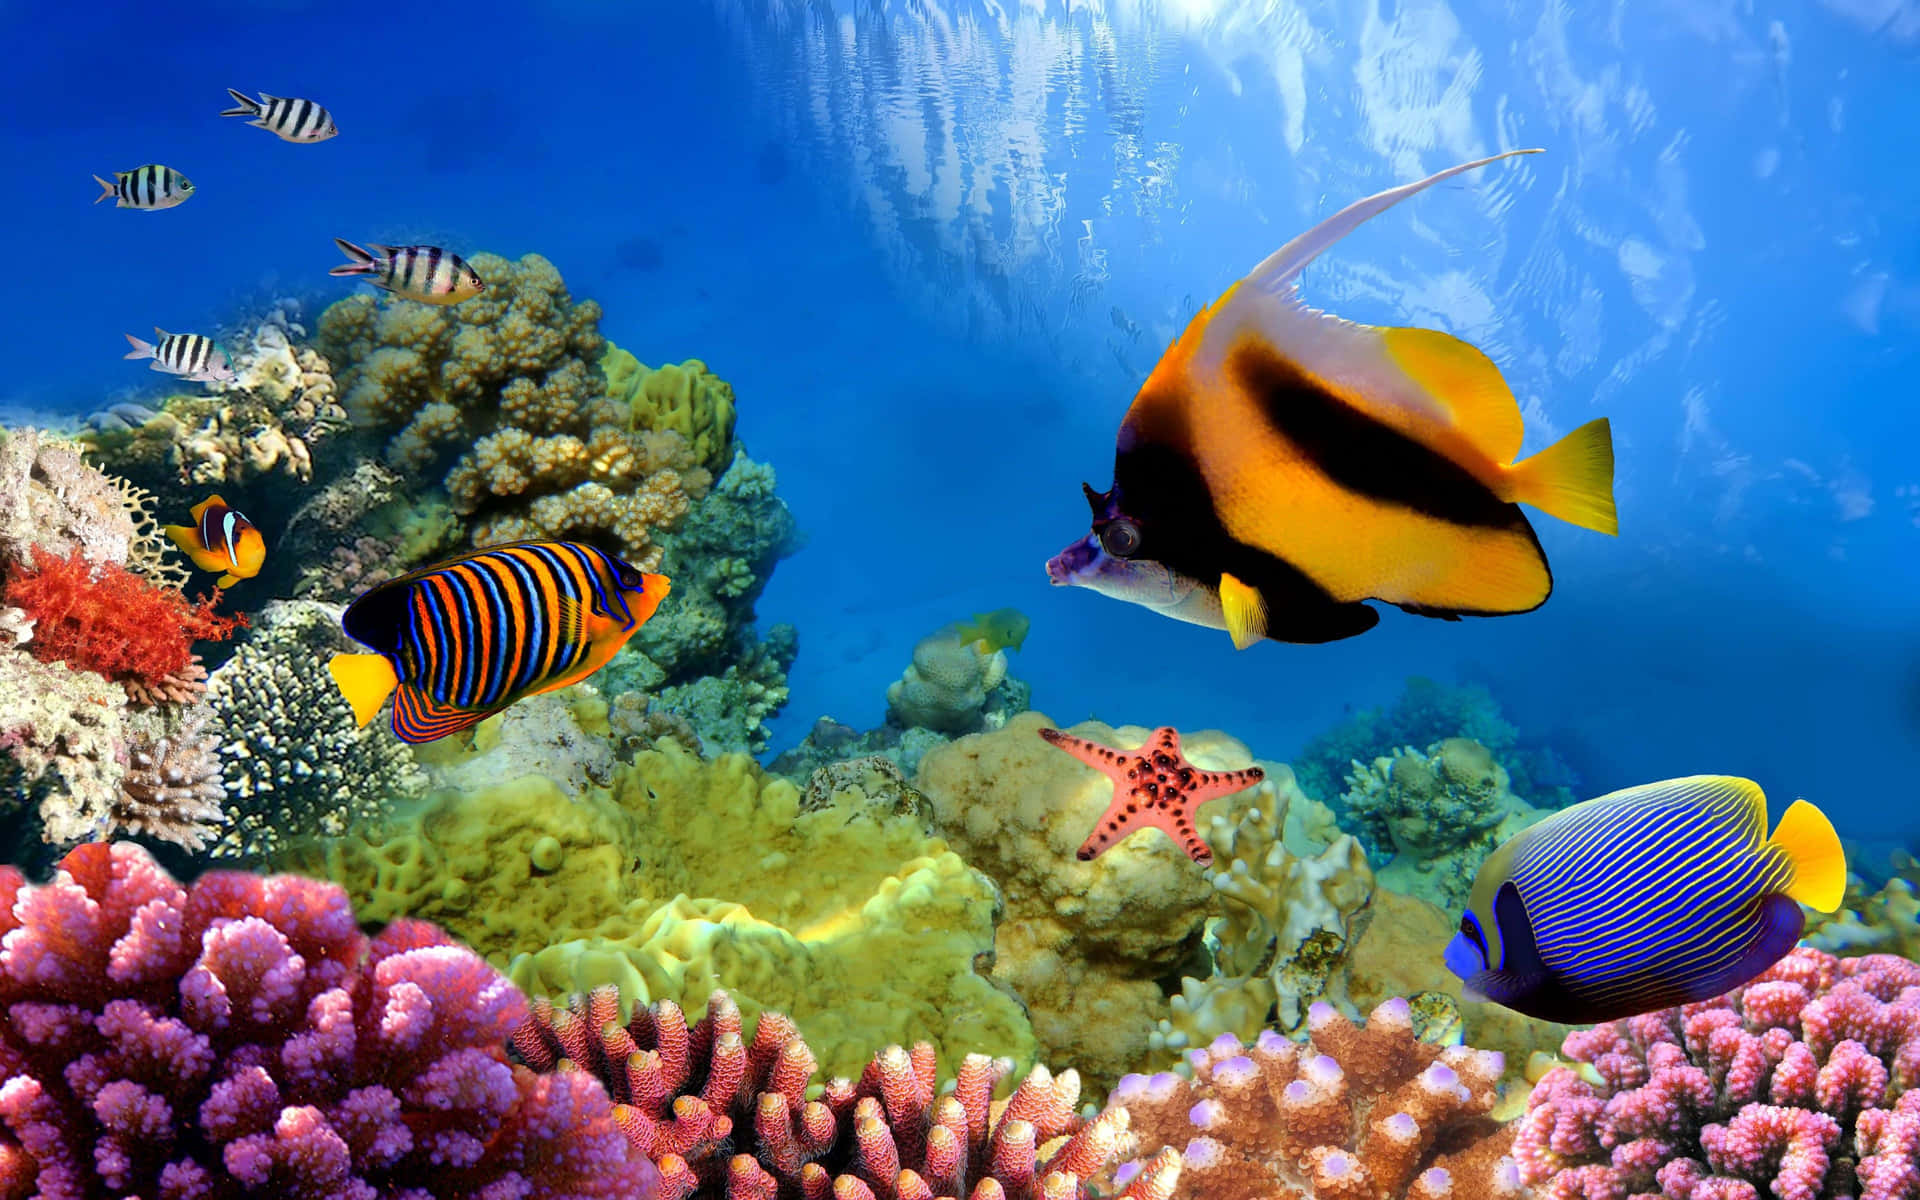 A vibrant underwater world showcasing a diverse coral colony.